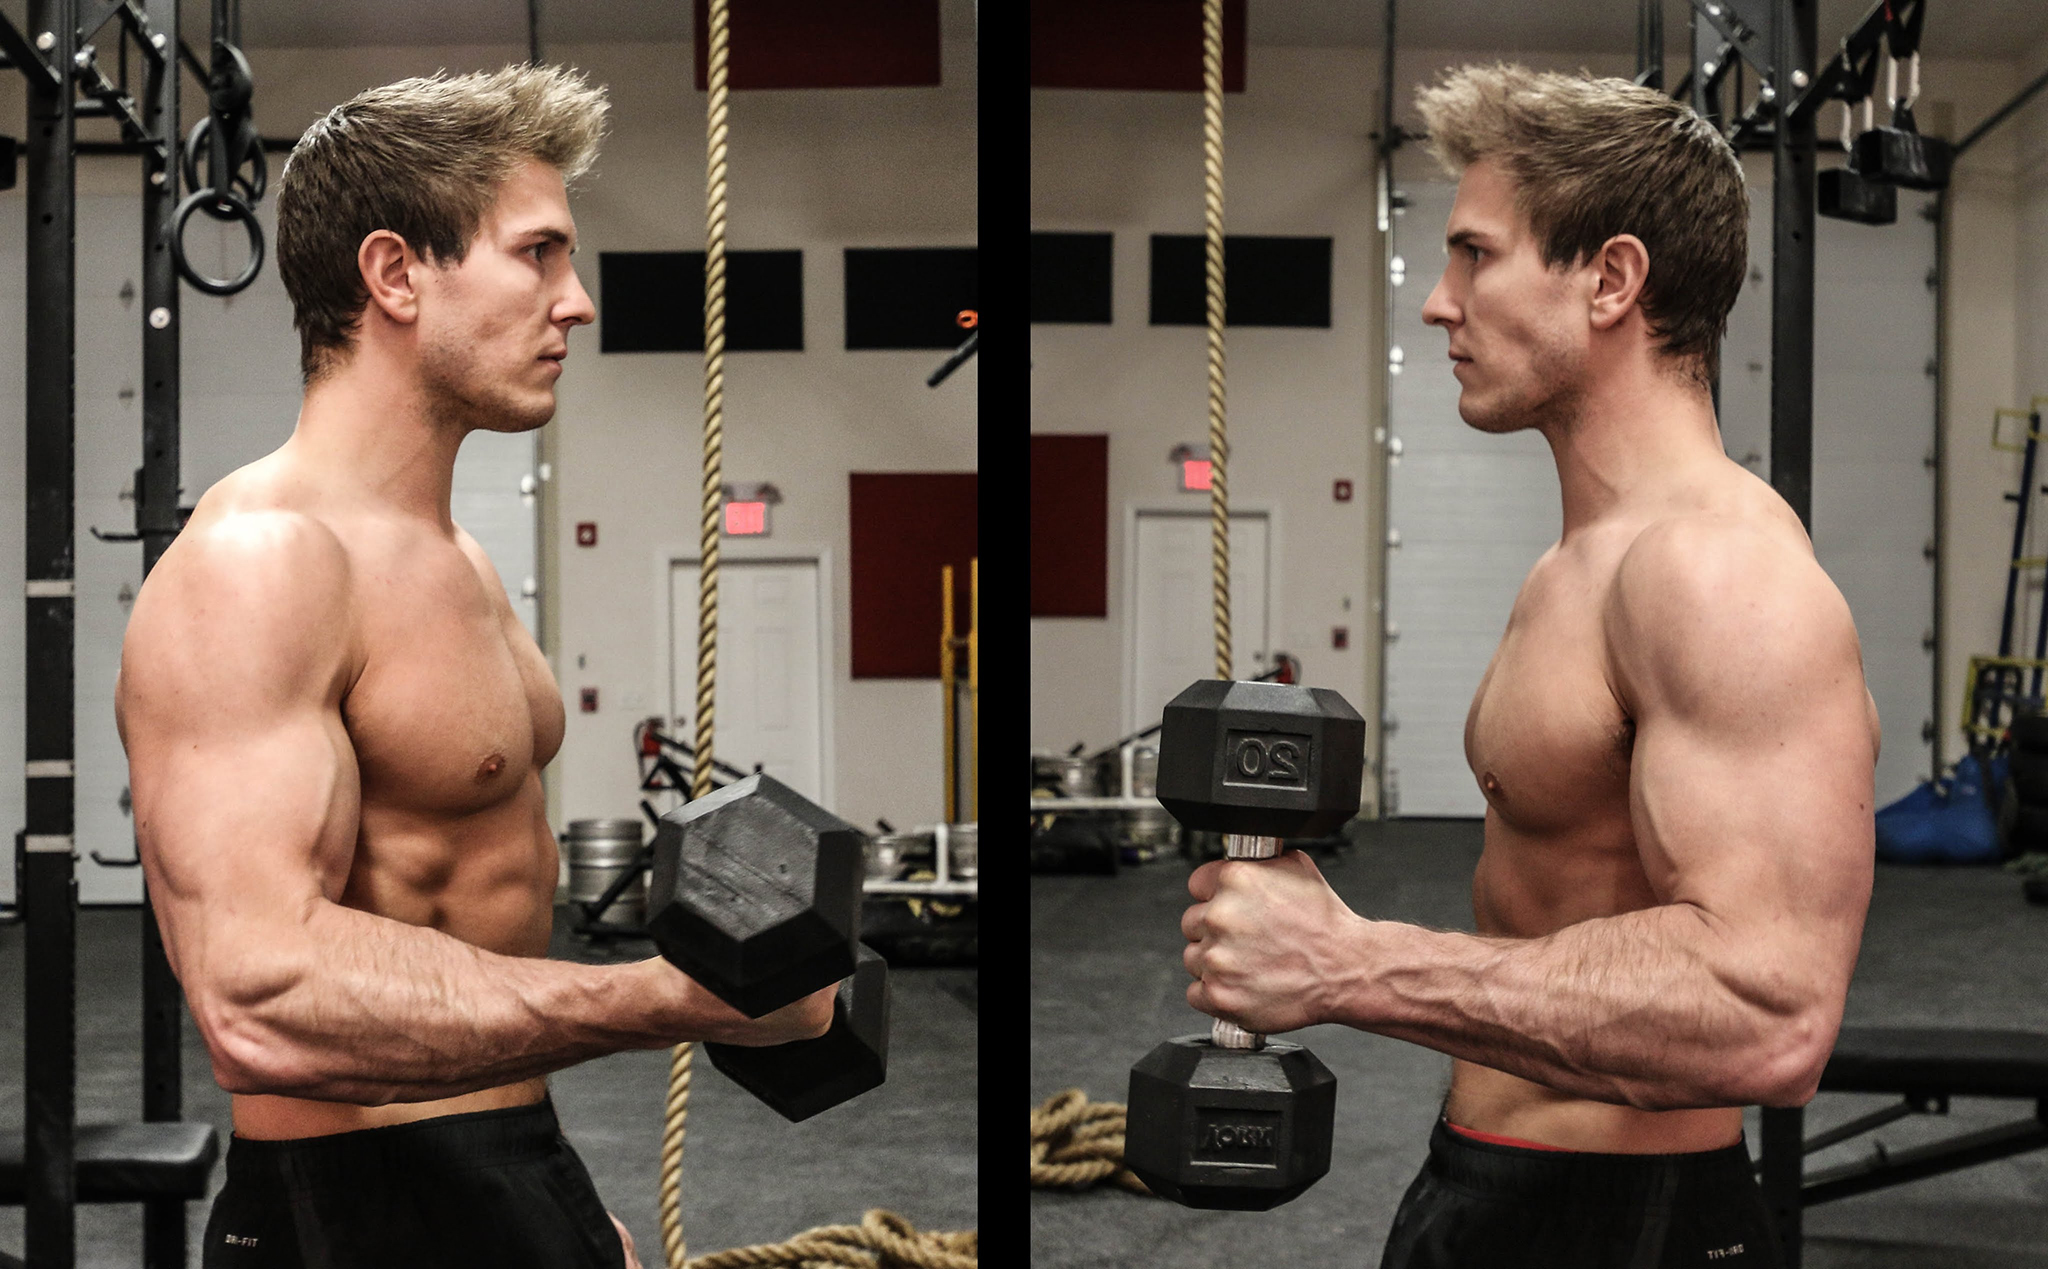 get-big-arms-3-exercises-to-build-huge-arms-fast